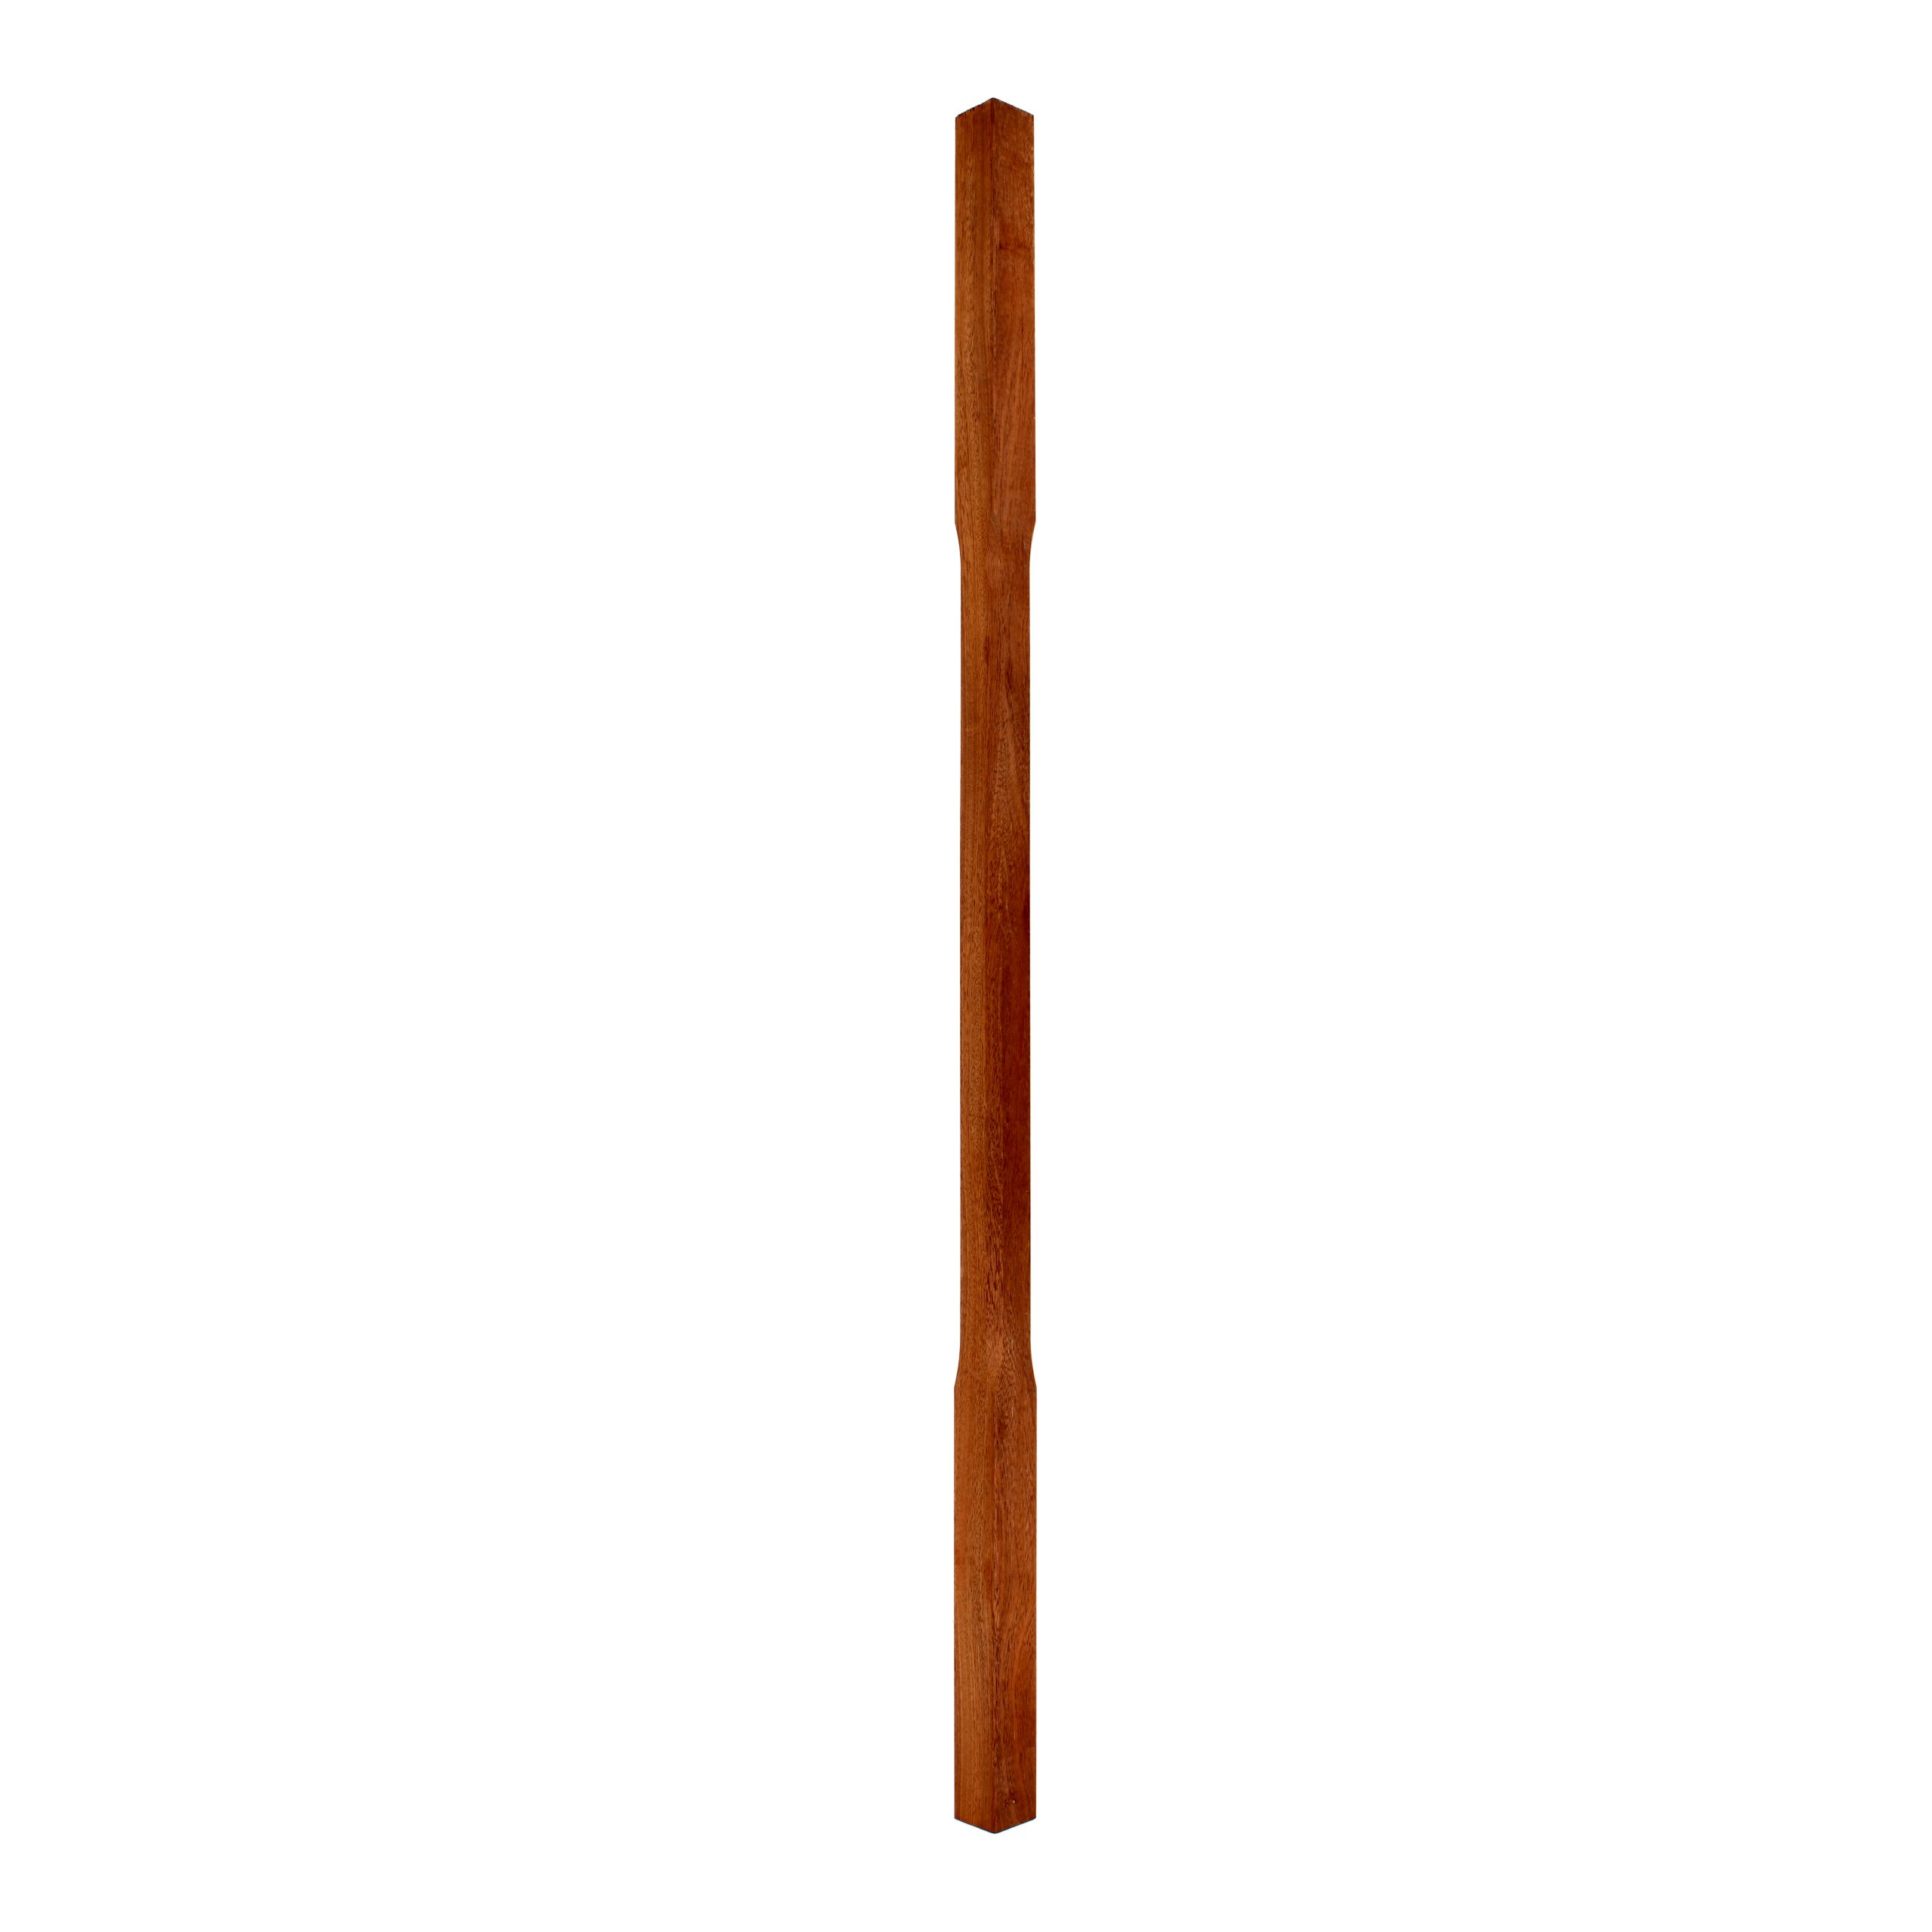 Mahogany-Chamfered-32mm x 900 - Wooden staircase spindle.